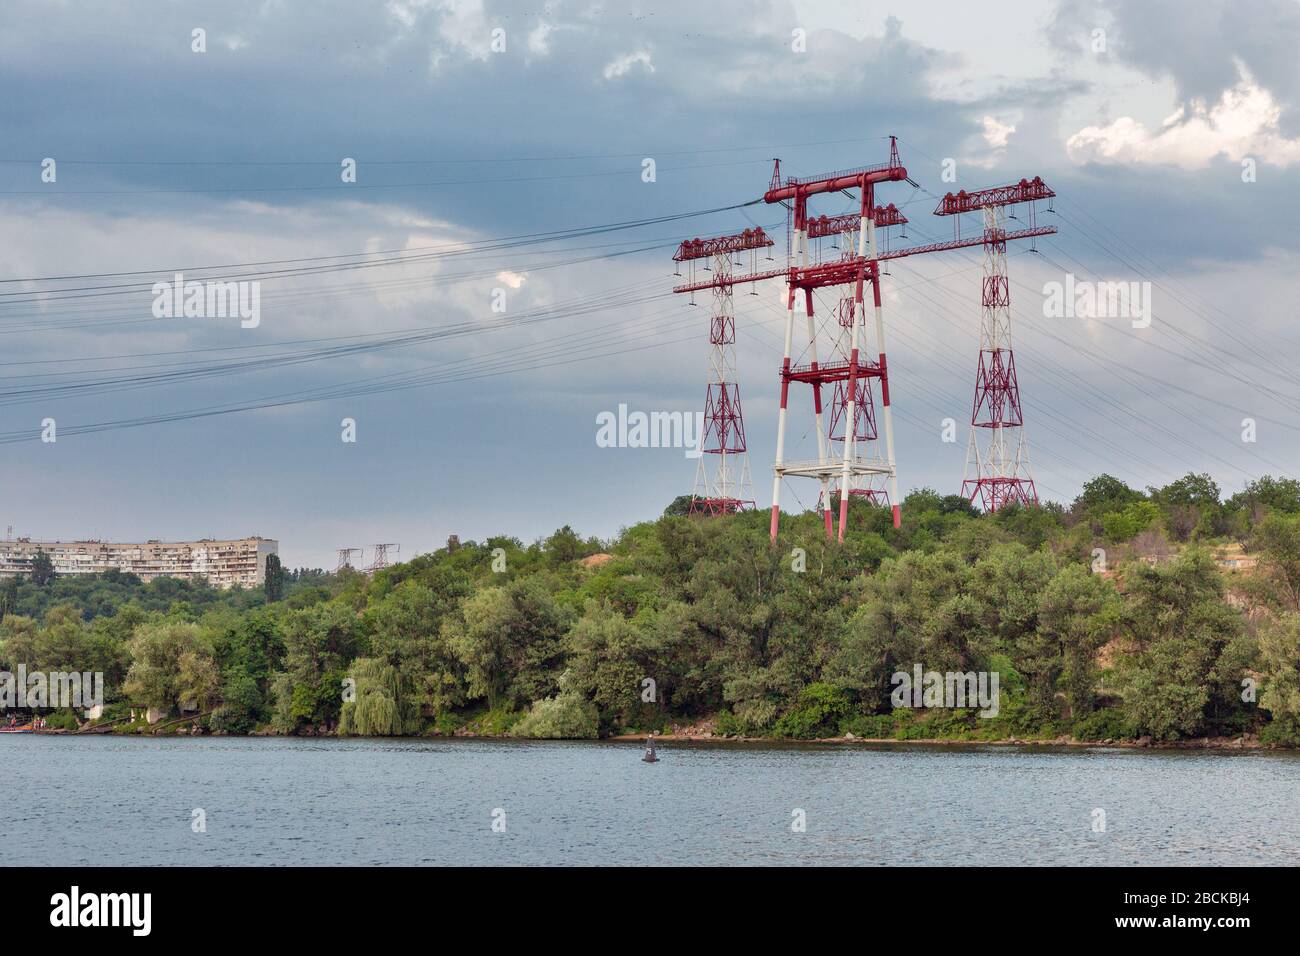 High voltage power lines towers at sunset on island of Khortytsia in Ukraine. Stock Photo